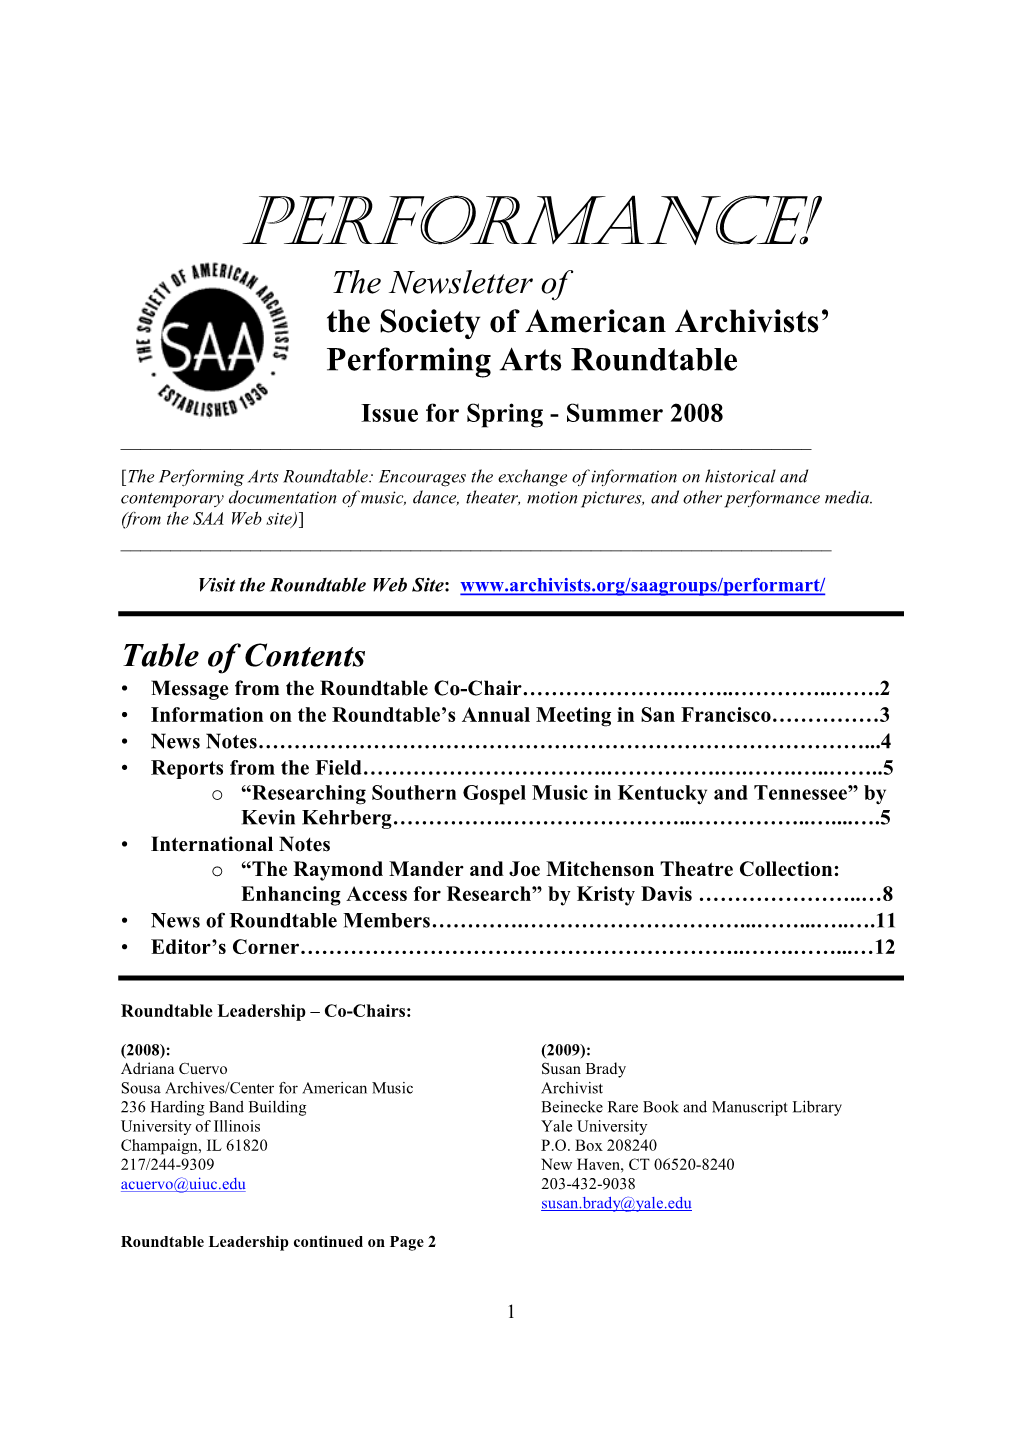 PERFORMANCE! the Newsletter of the Society of American Archivists’ Performing Arts Roundtable